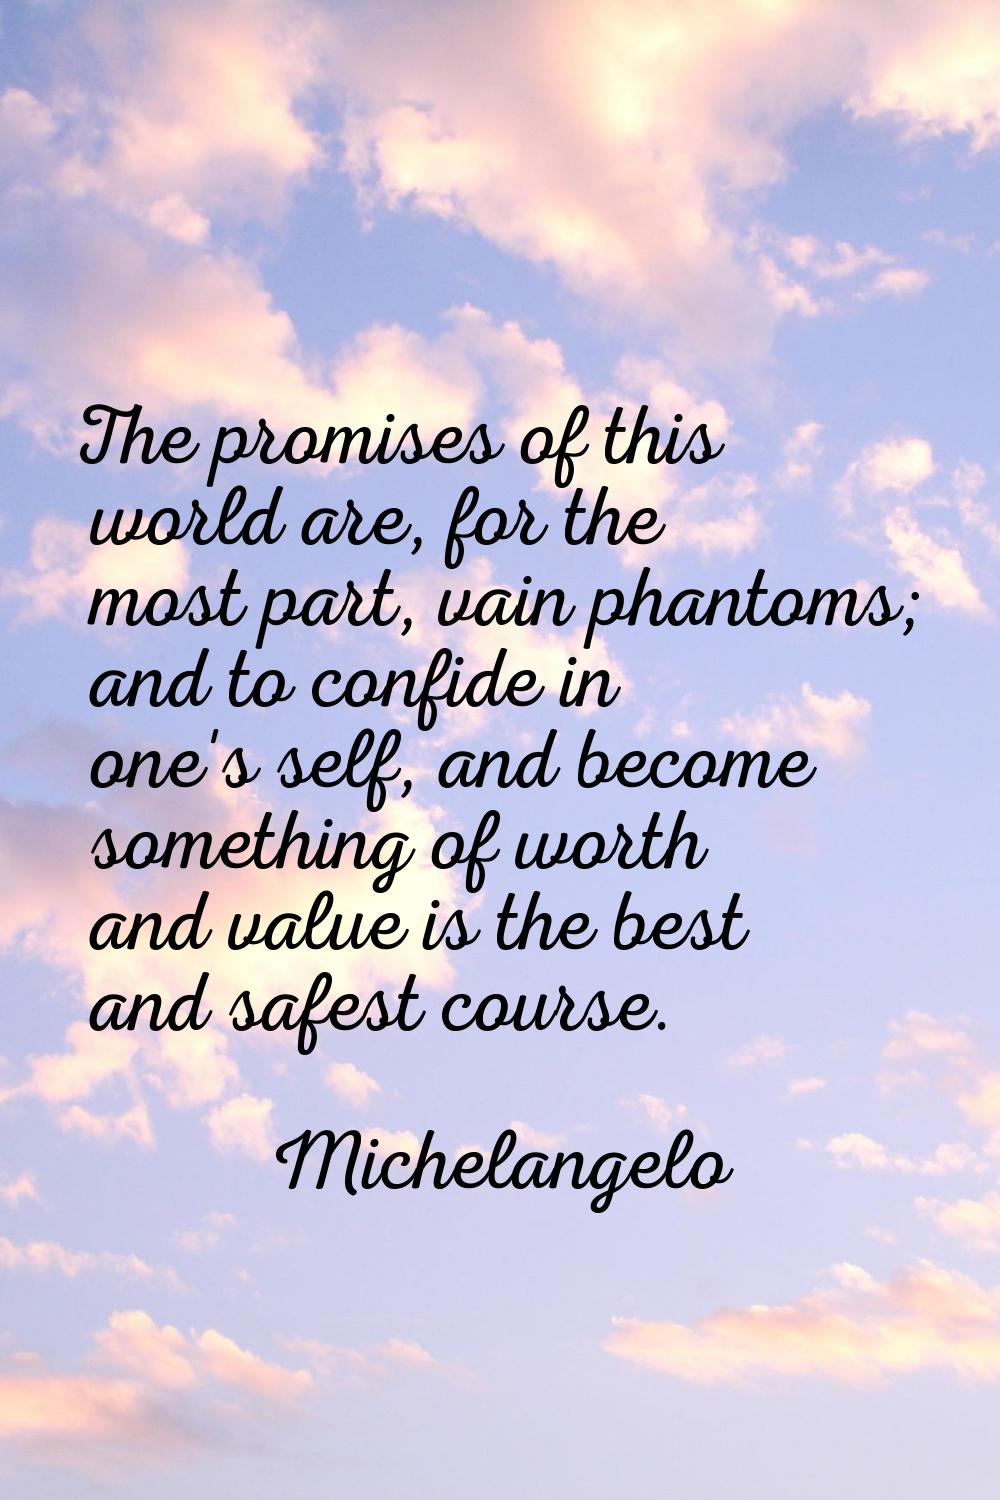 The promises of this world are, for the most part, vain phantoms; and to confide in one's self, and